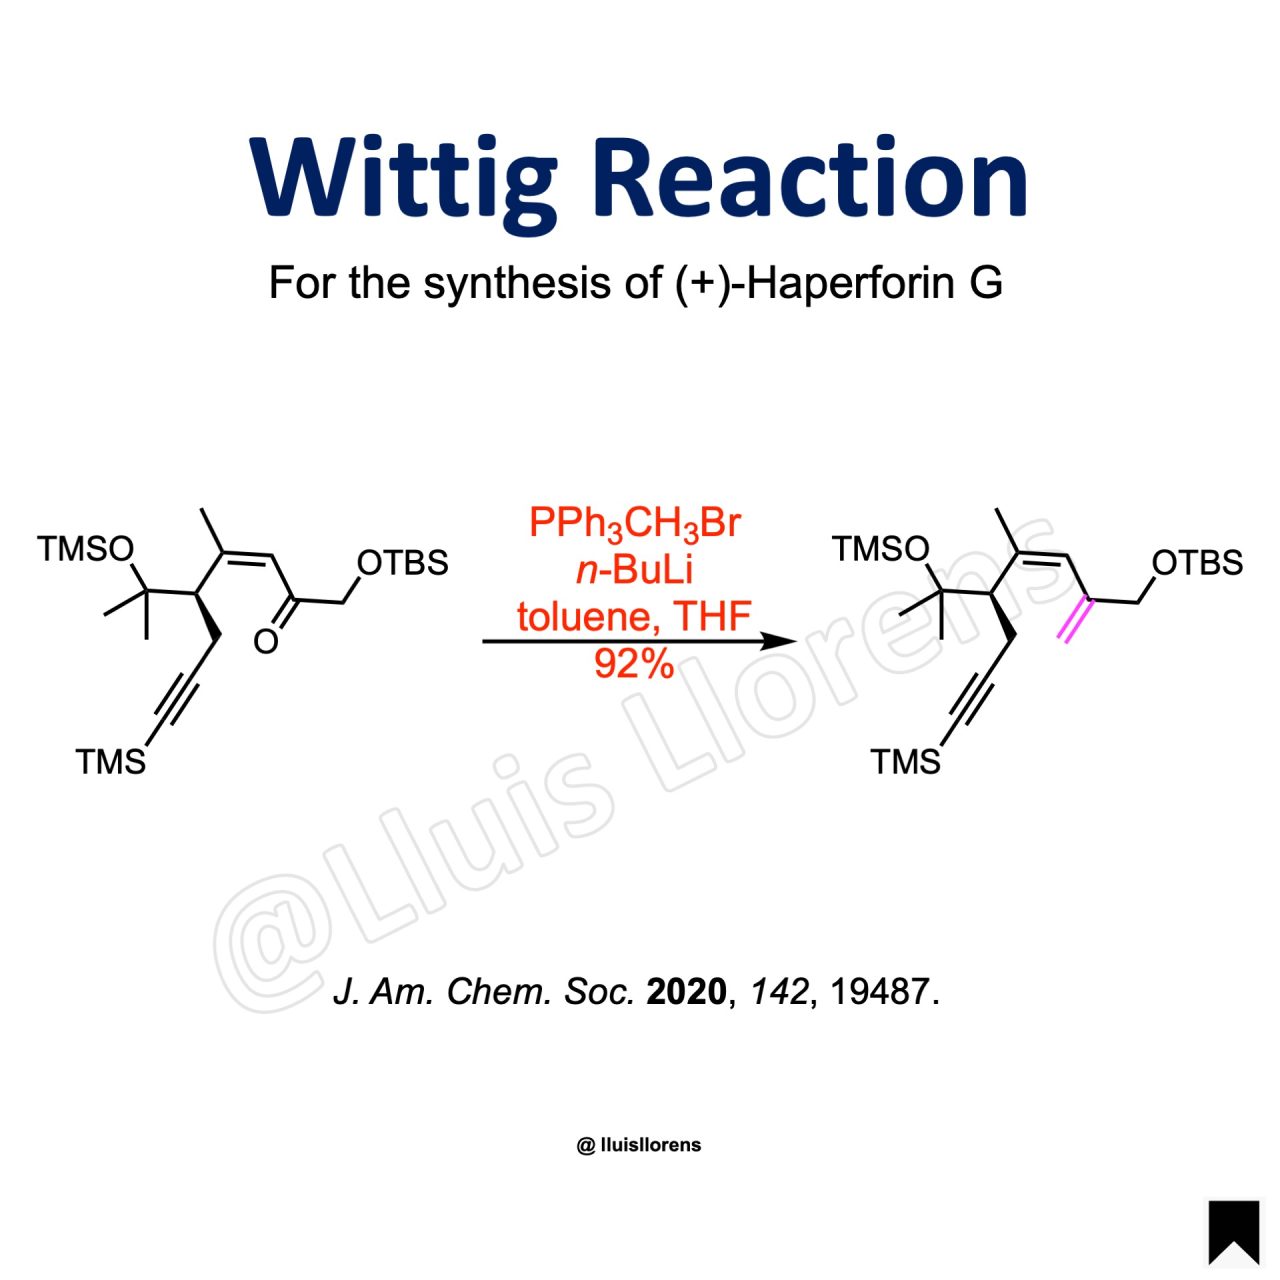 wittig reaction research paper